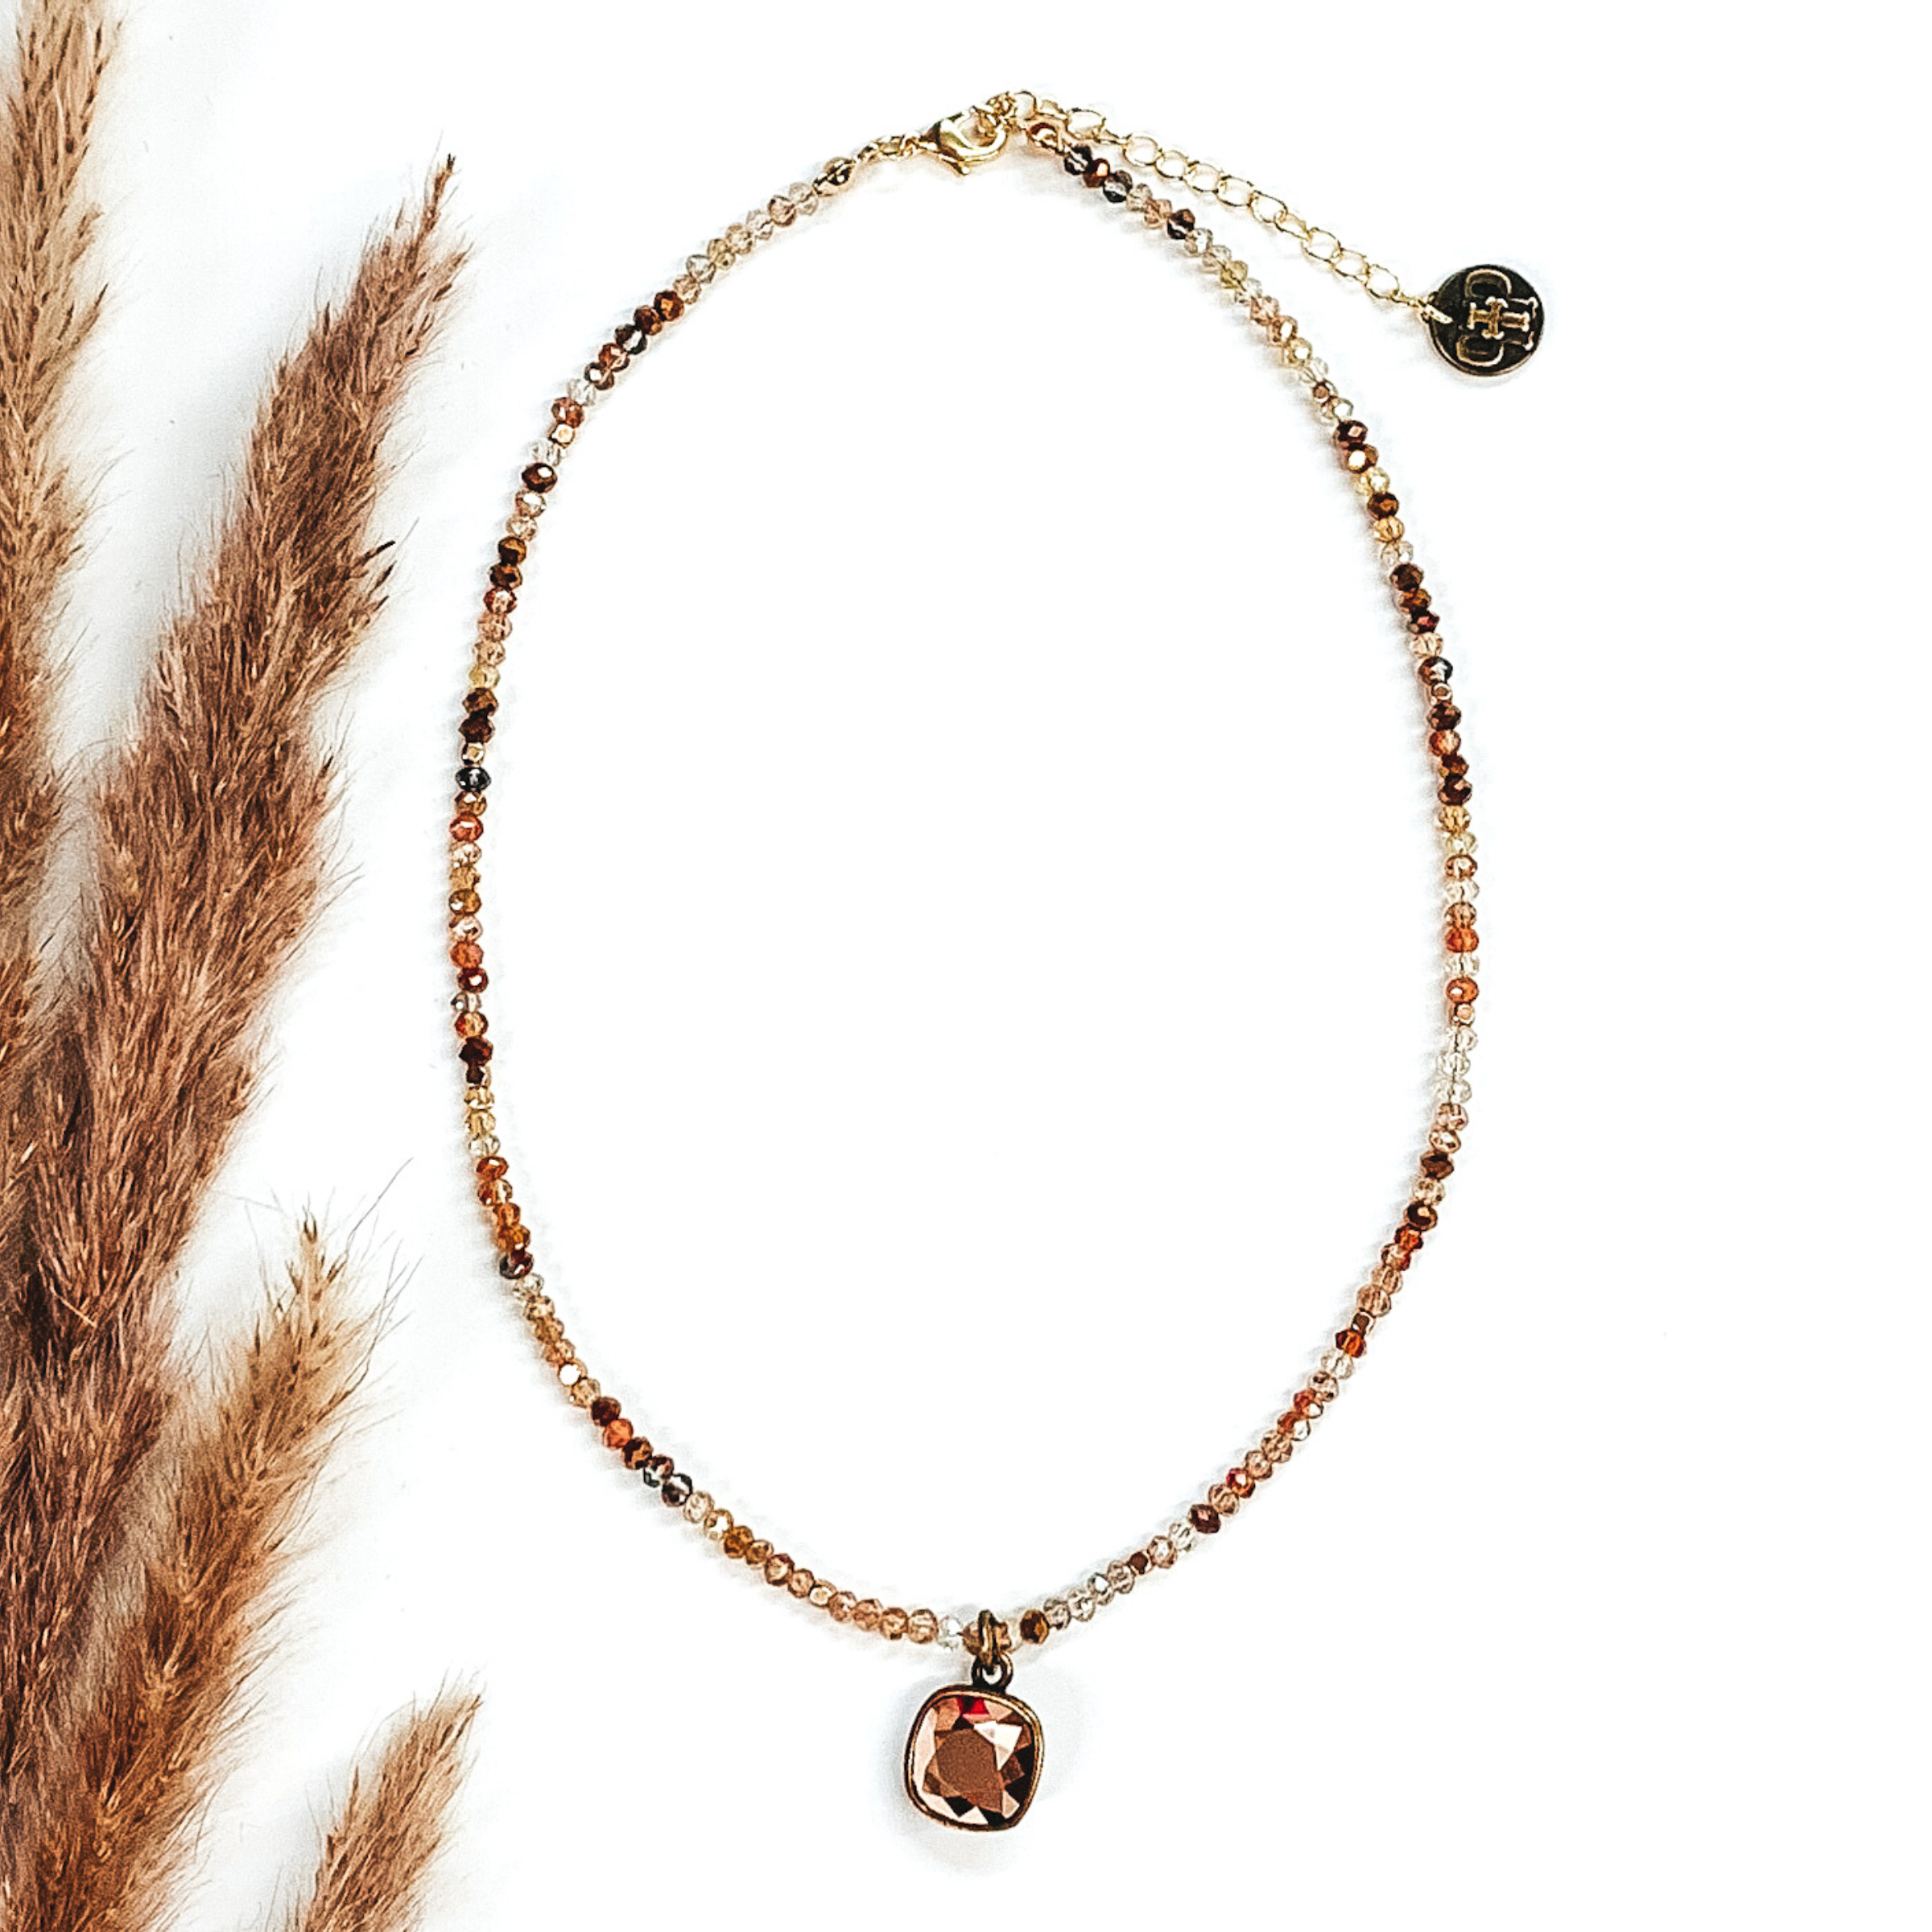 Pink Panache | Bronze and Rose Gold Mix Crystal Beaded Necklace with Rose Gold Cushion Cut Crystal - Giddy Up Glamour Boutique